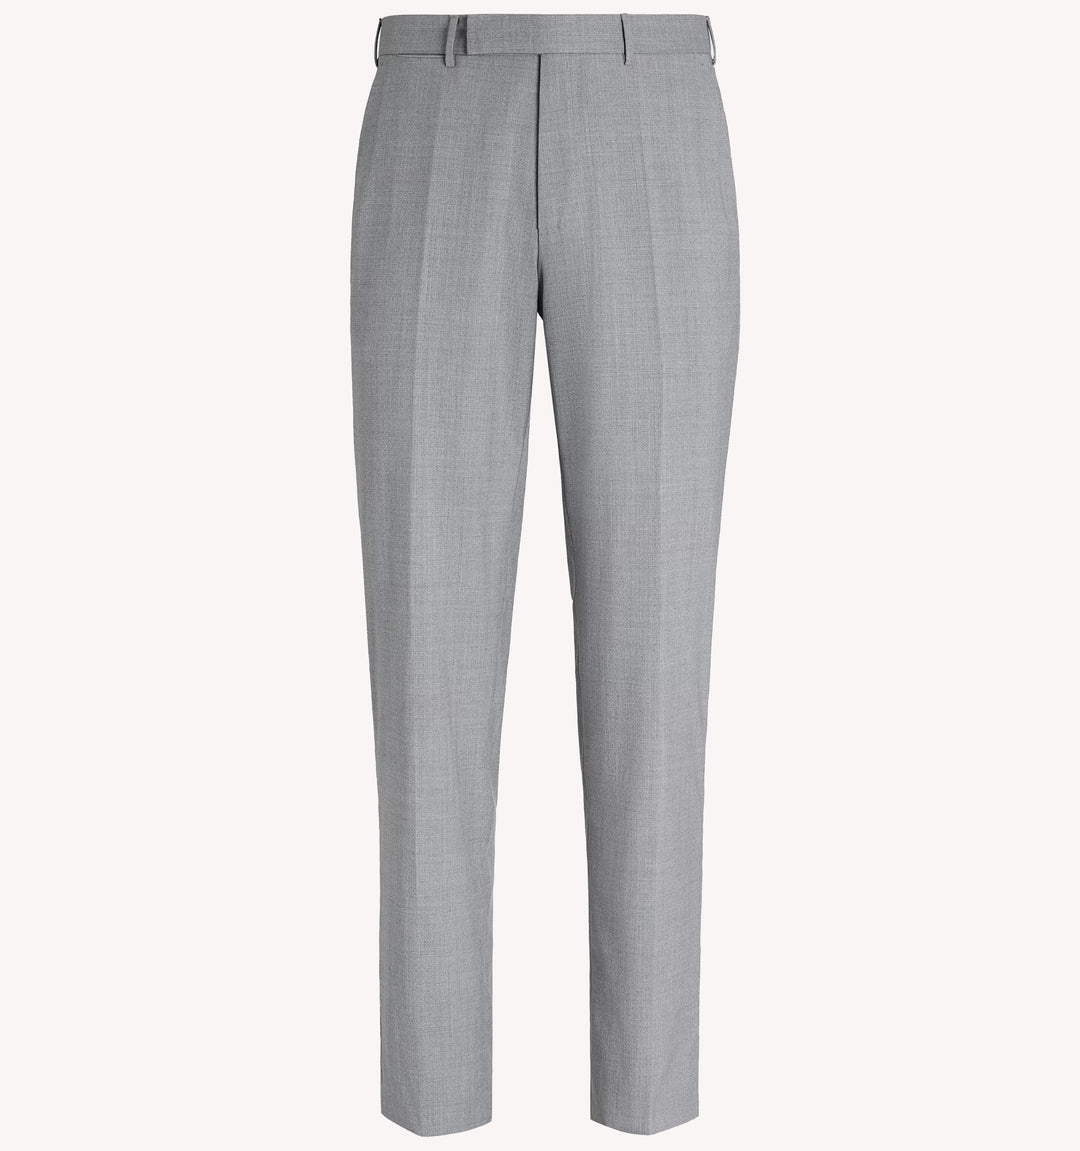 Zegna Dress Trousers in Light Grey